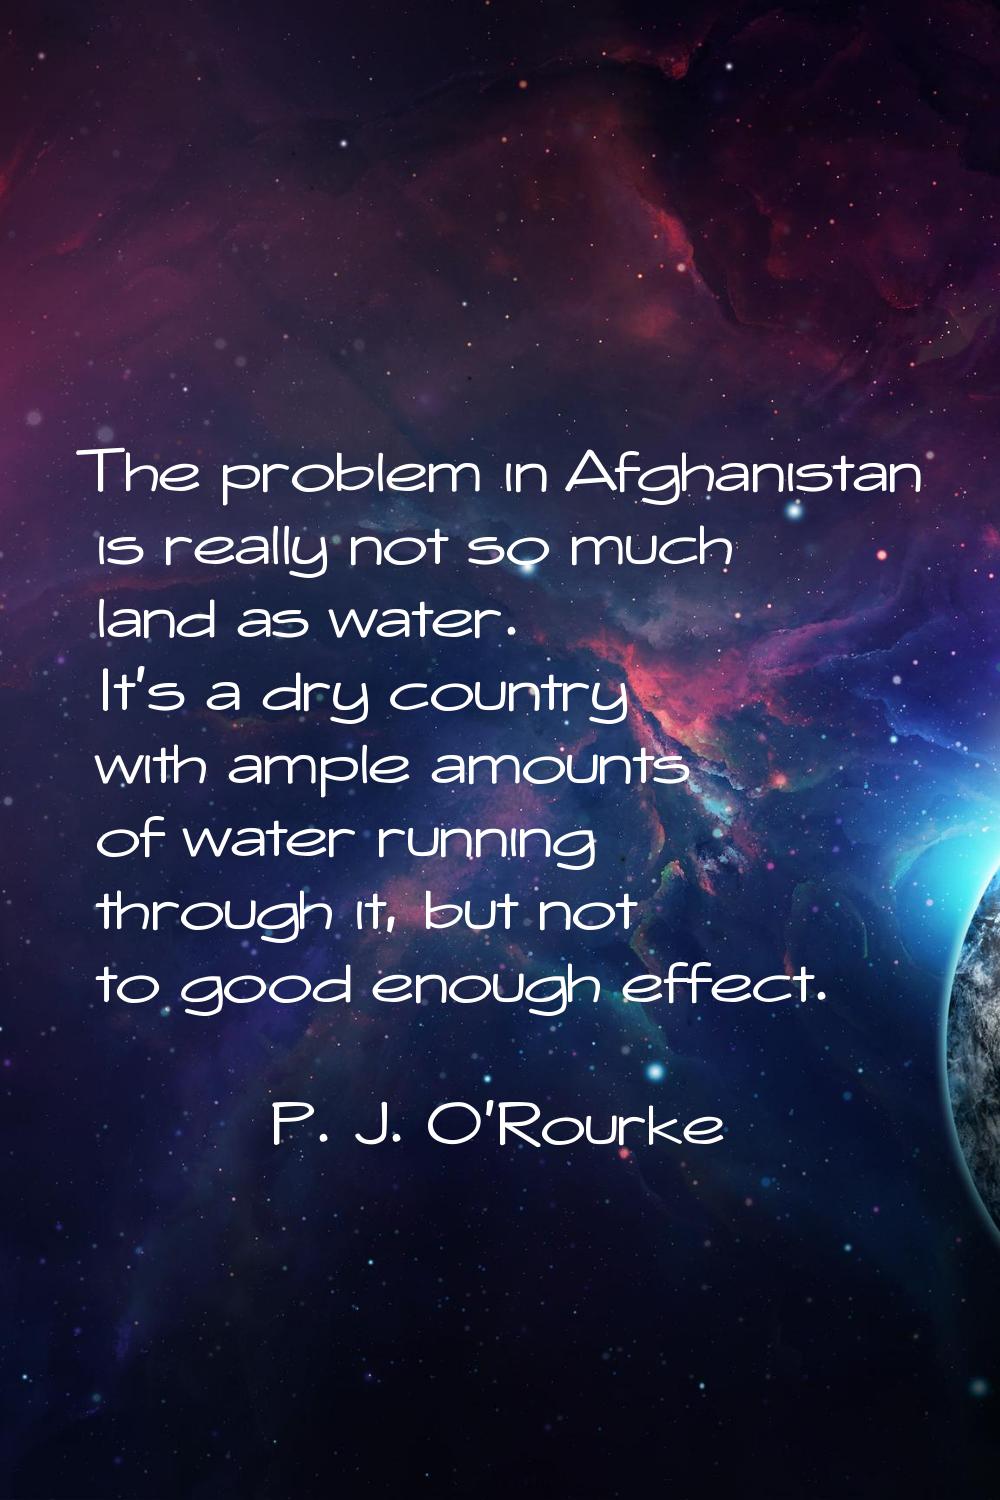 The problem in Afghanistan is really not so much land as water. It's a dry country with ample amoun